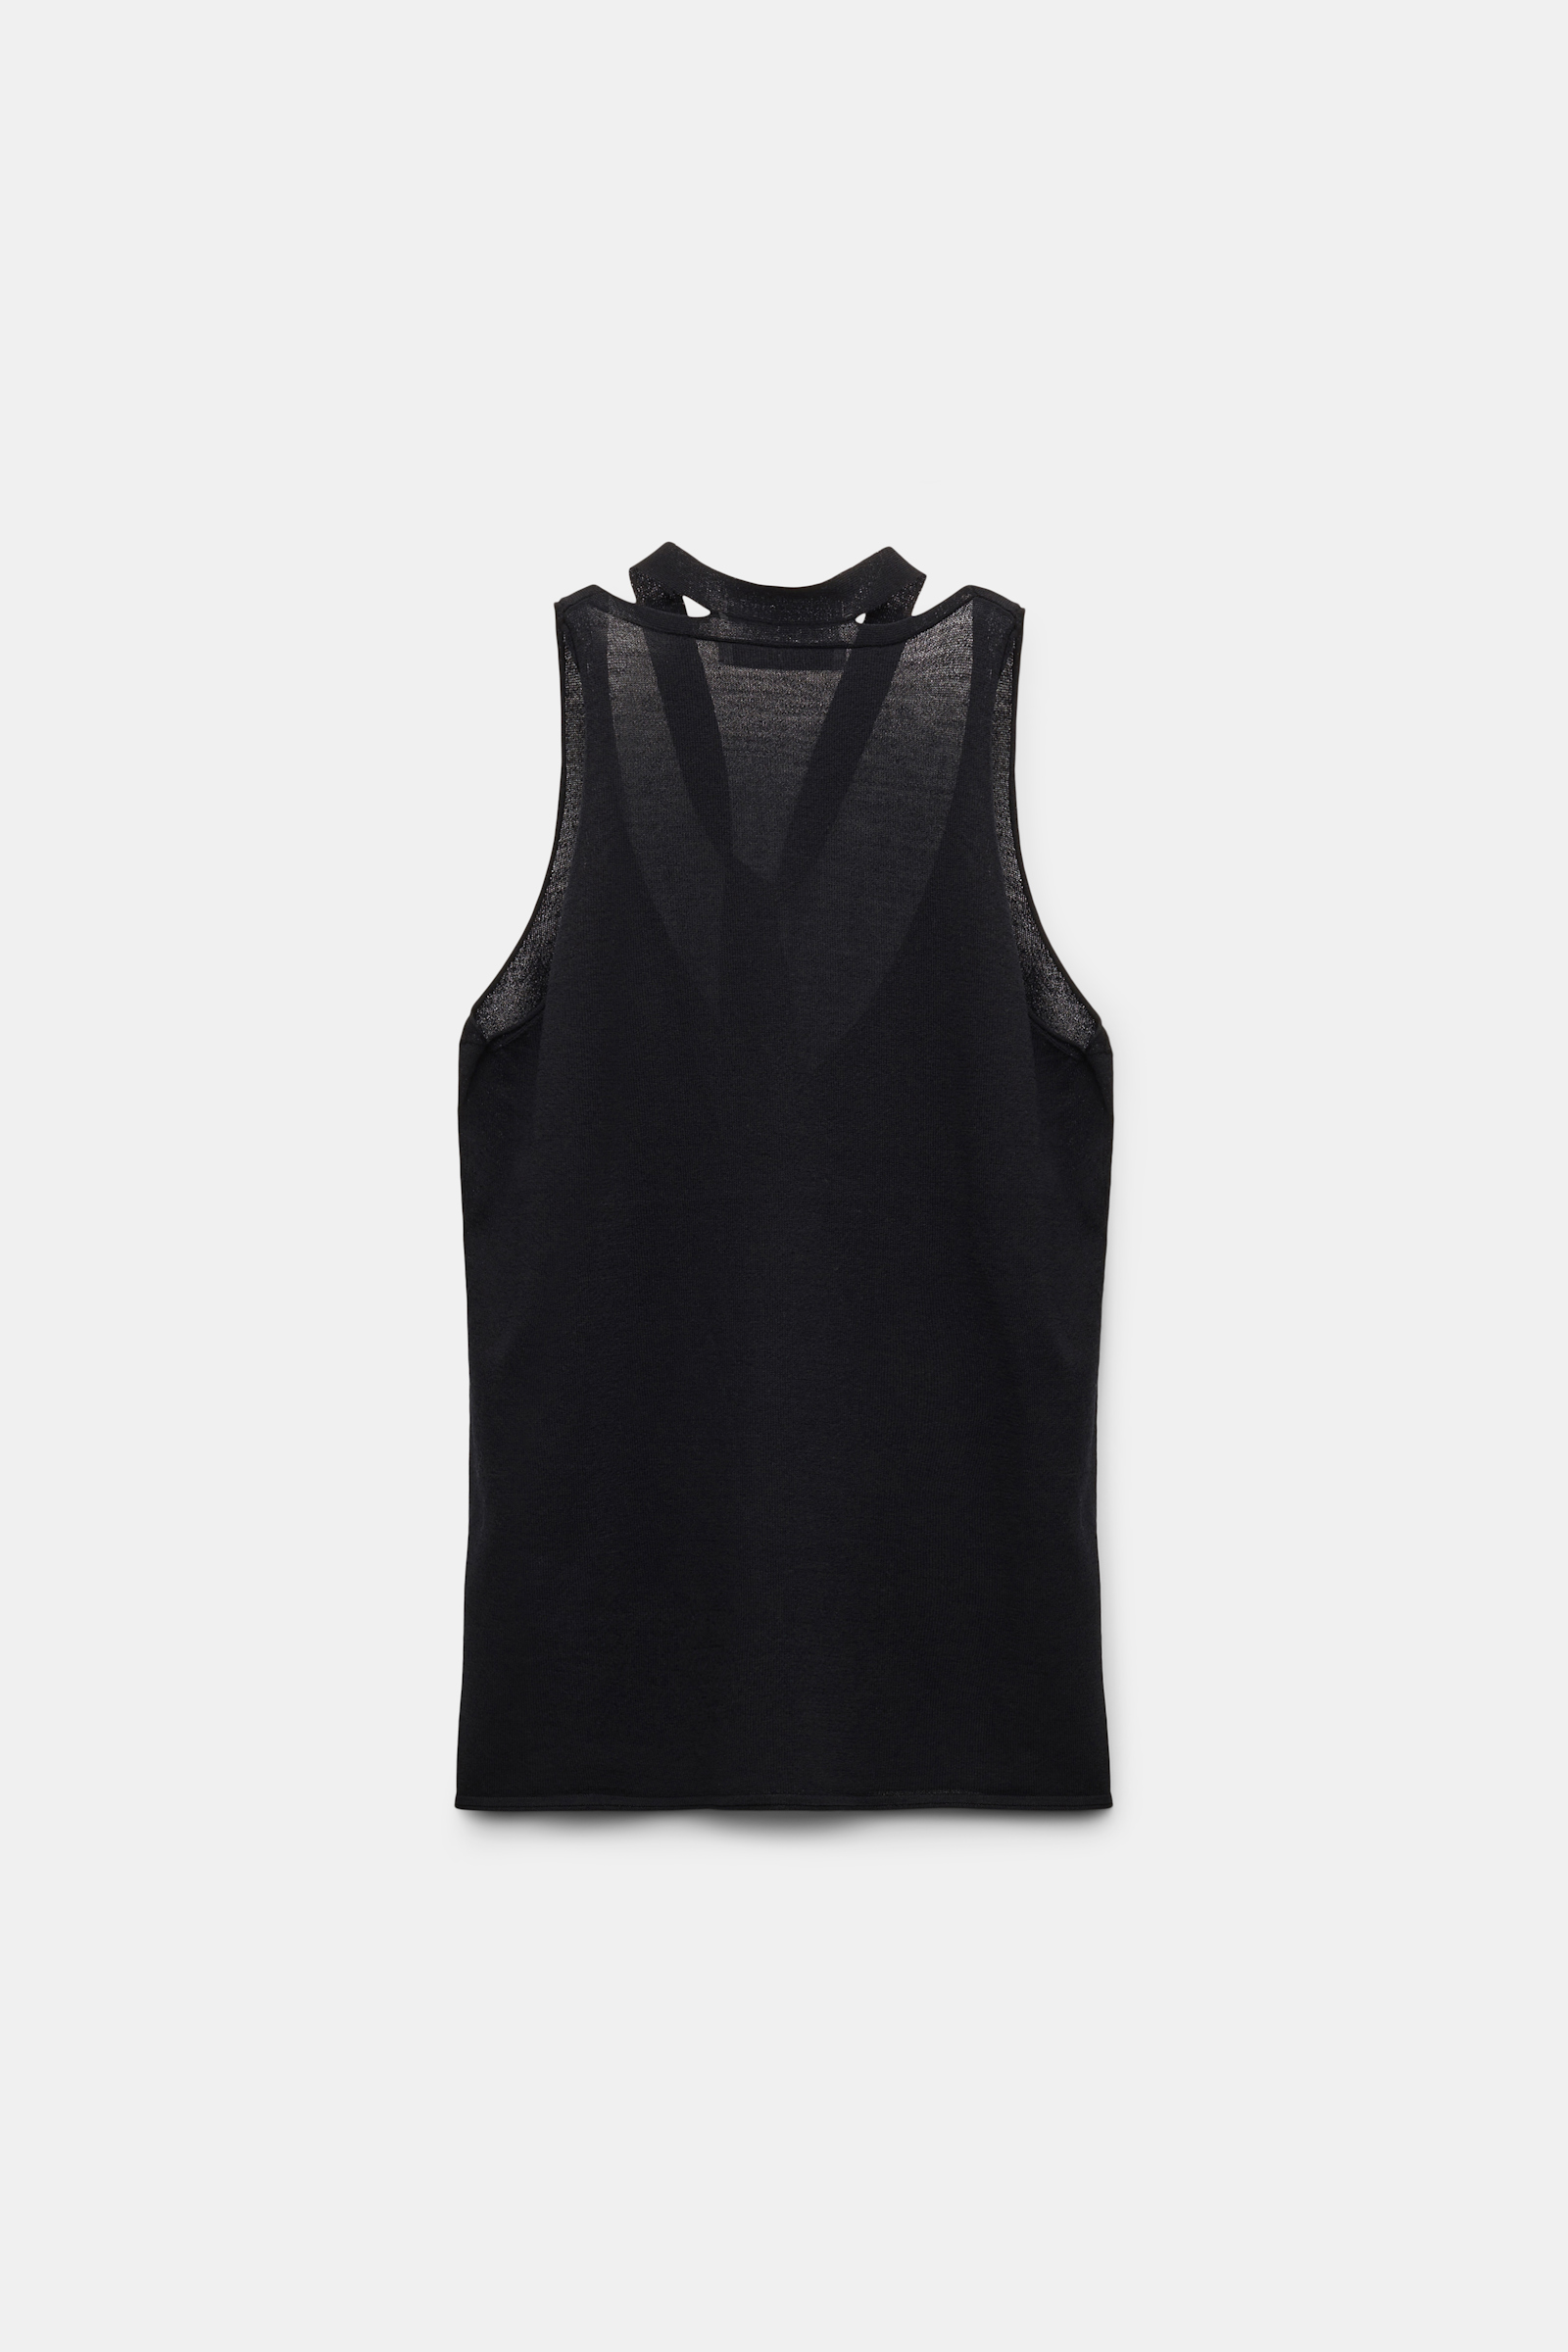 Dorothee Schumacher V-neck tank top with fringed tie pure black